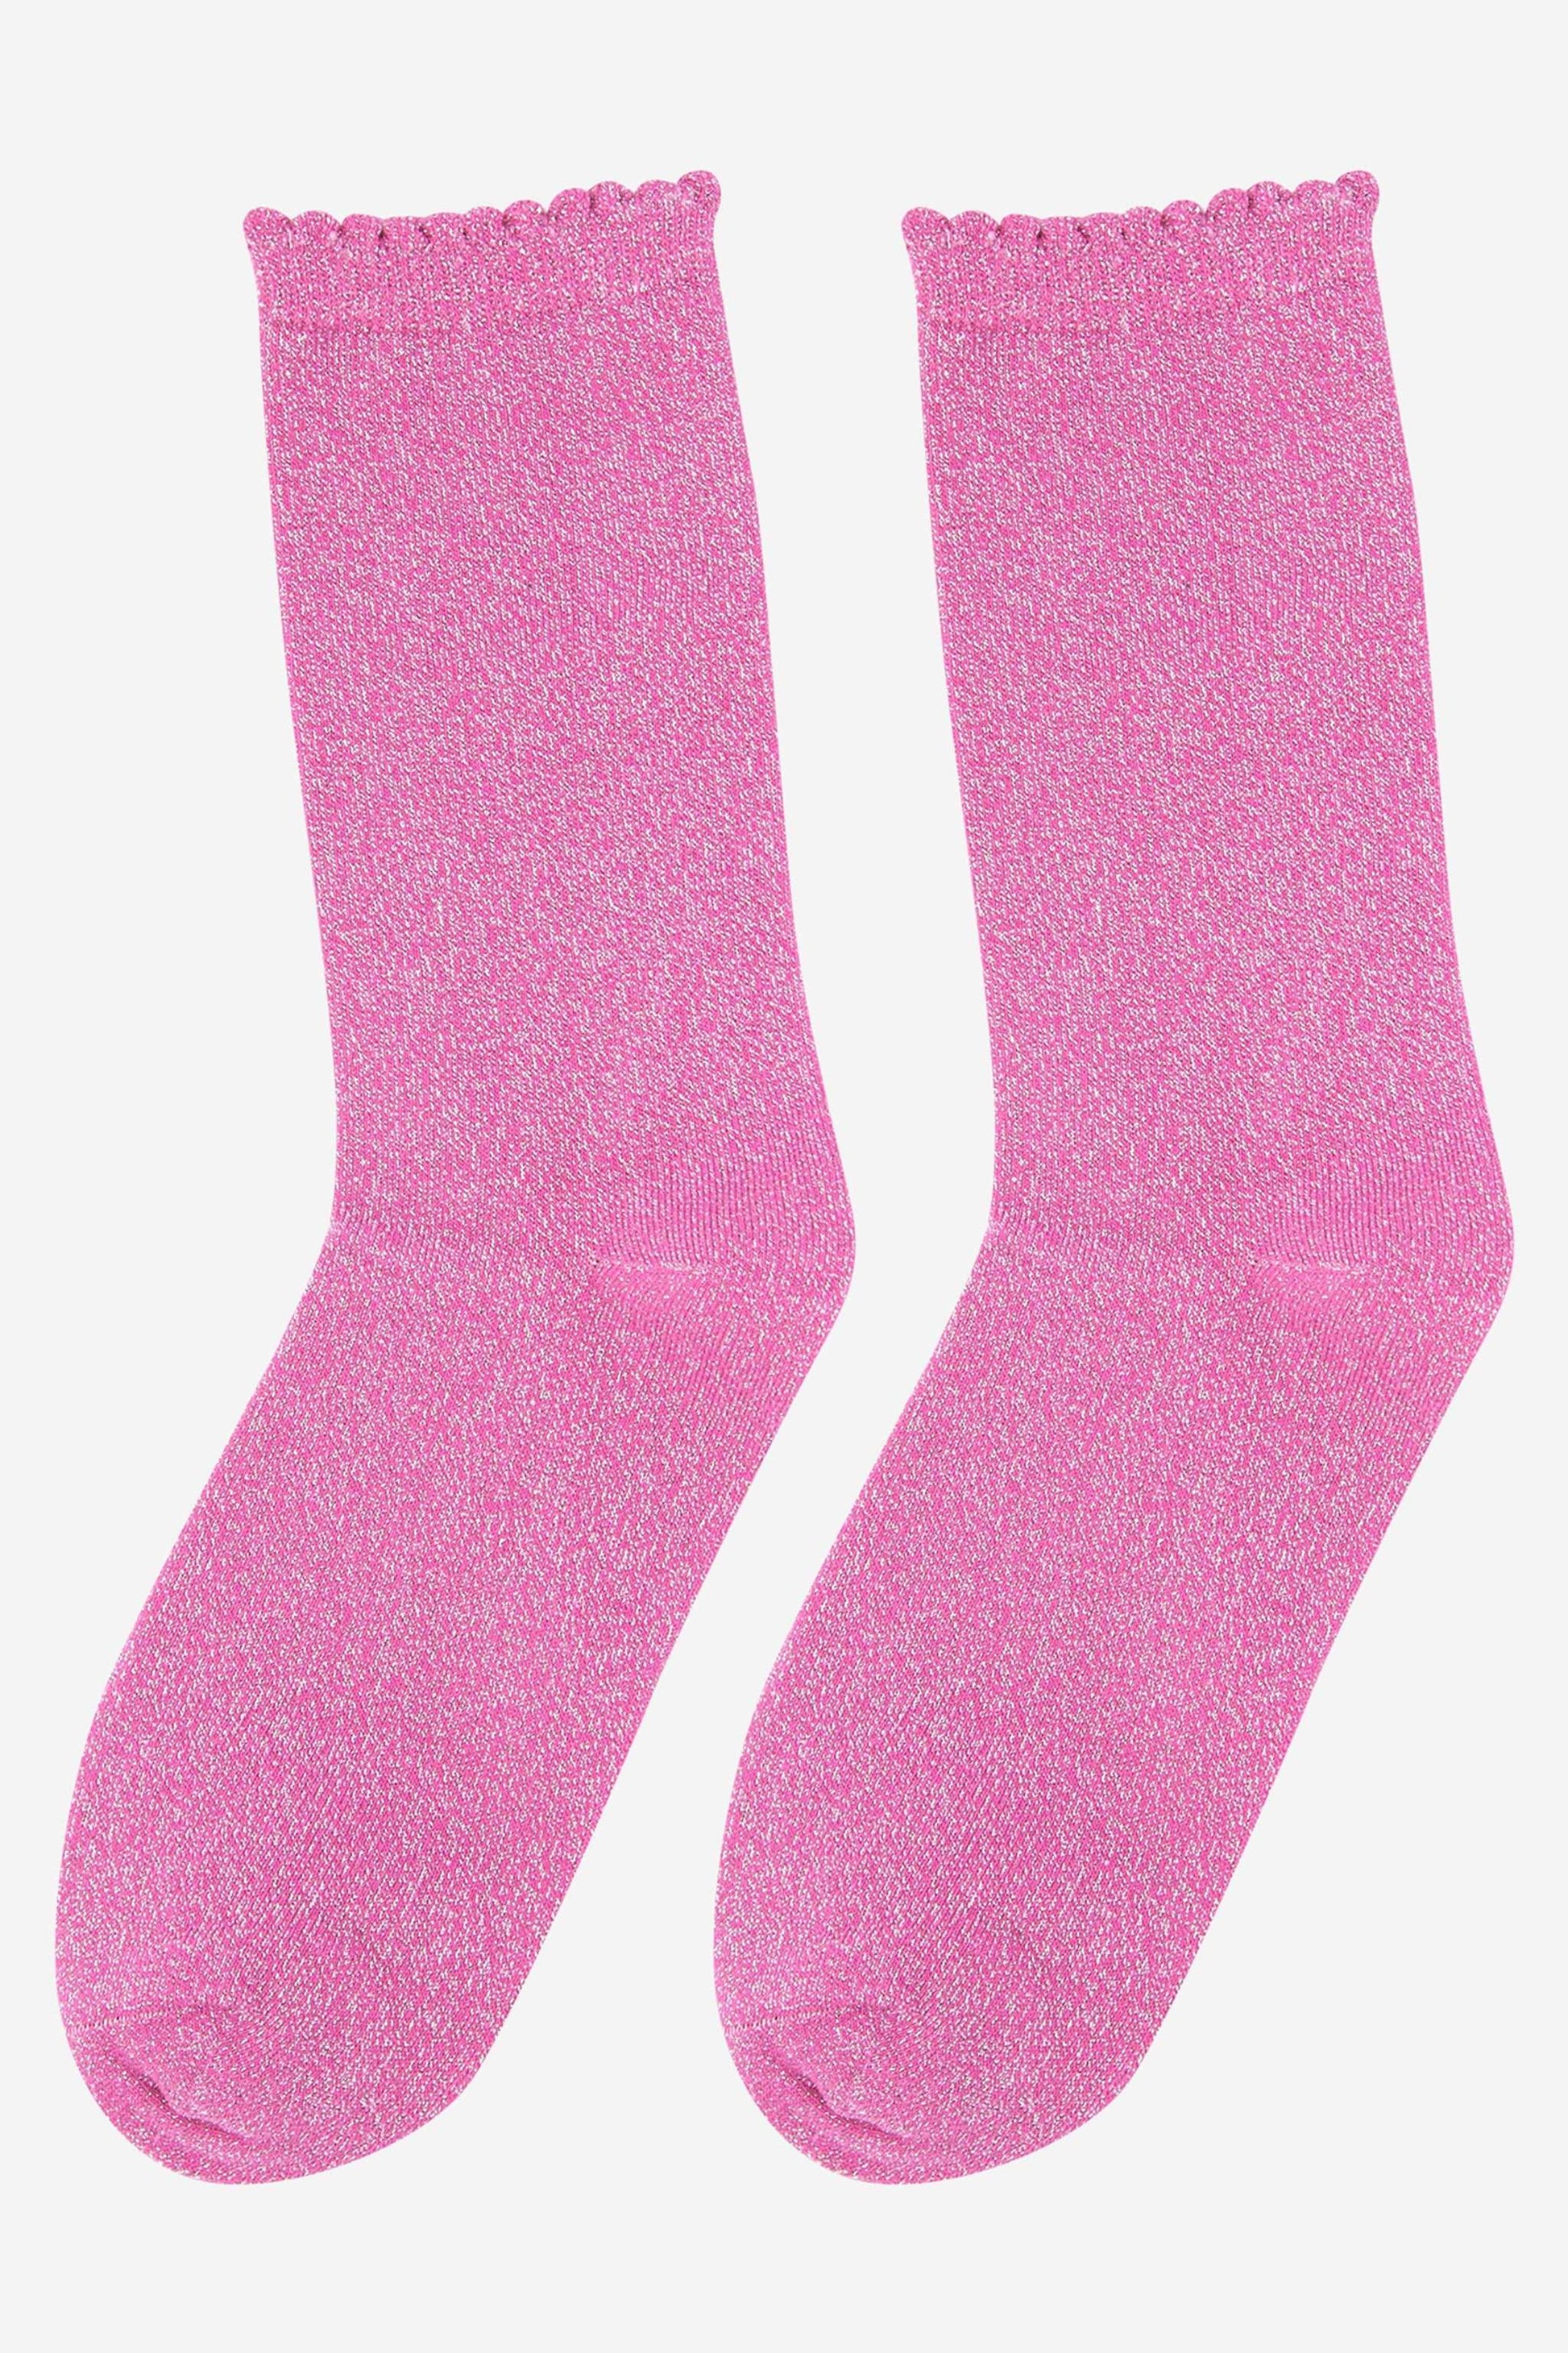 Womens Cotton Blend All Over Glitter Ankle Socks in Hot Pink - Allison's Boutique